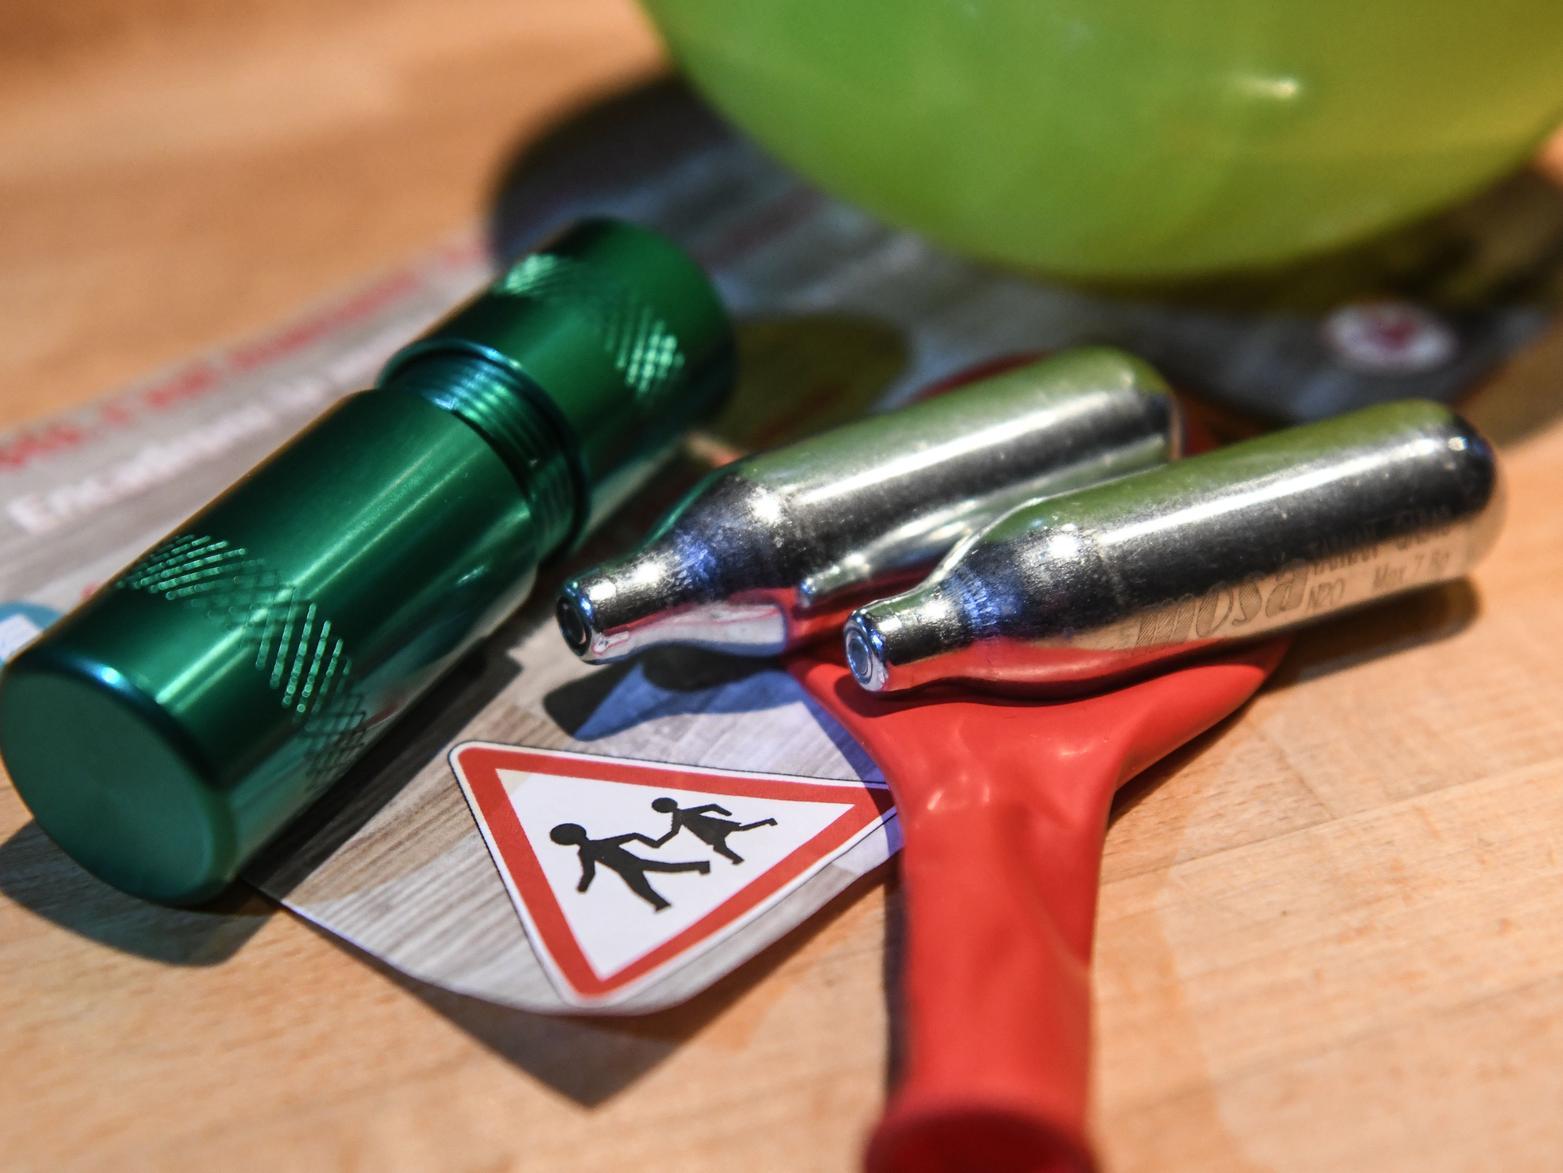 Police also seized 47 doses of another NPS - nitrous oxide, which is commonly known as laughing gas. Picture: Denis Charlet/AFP via Getty Images